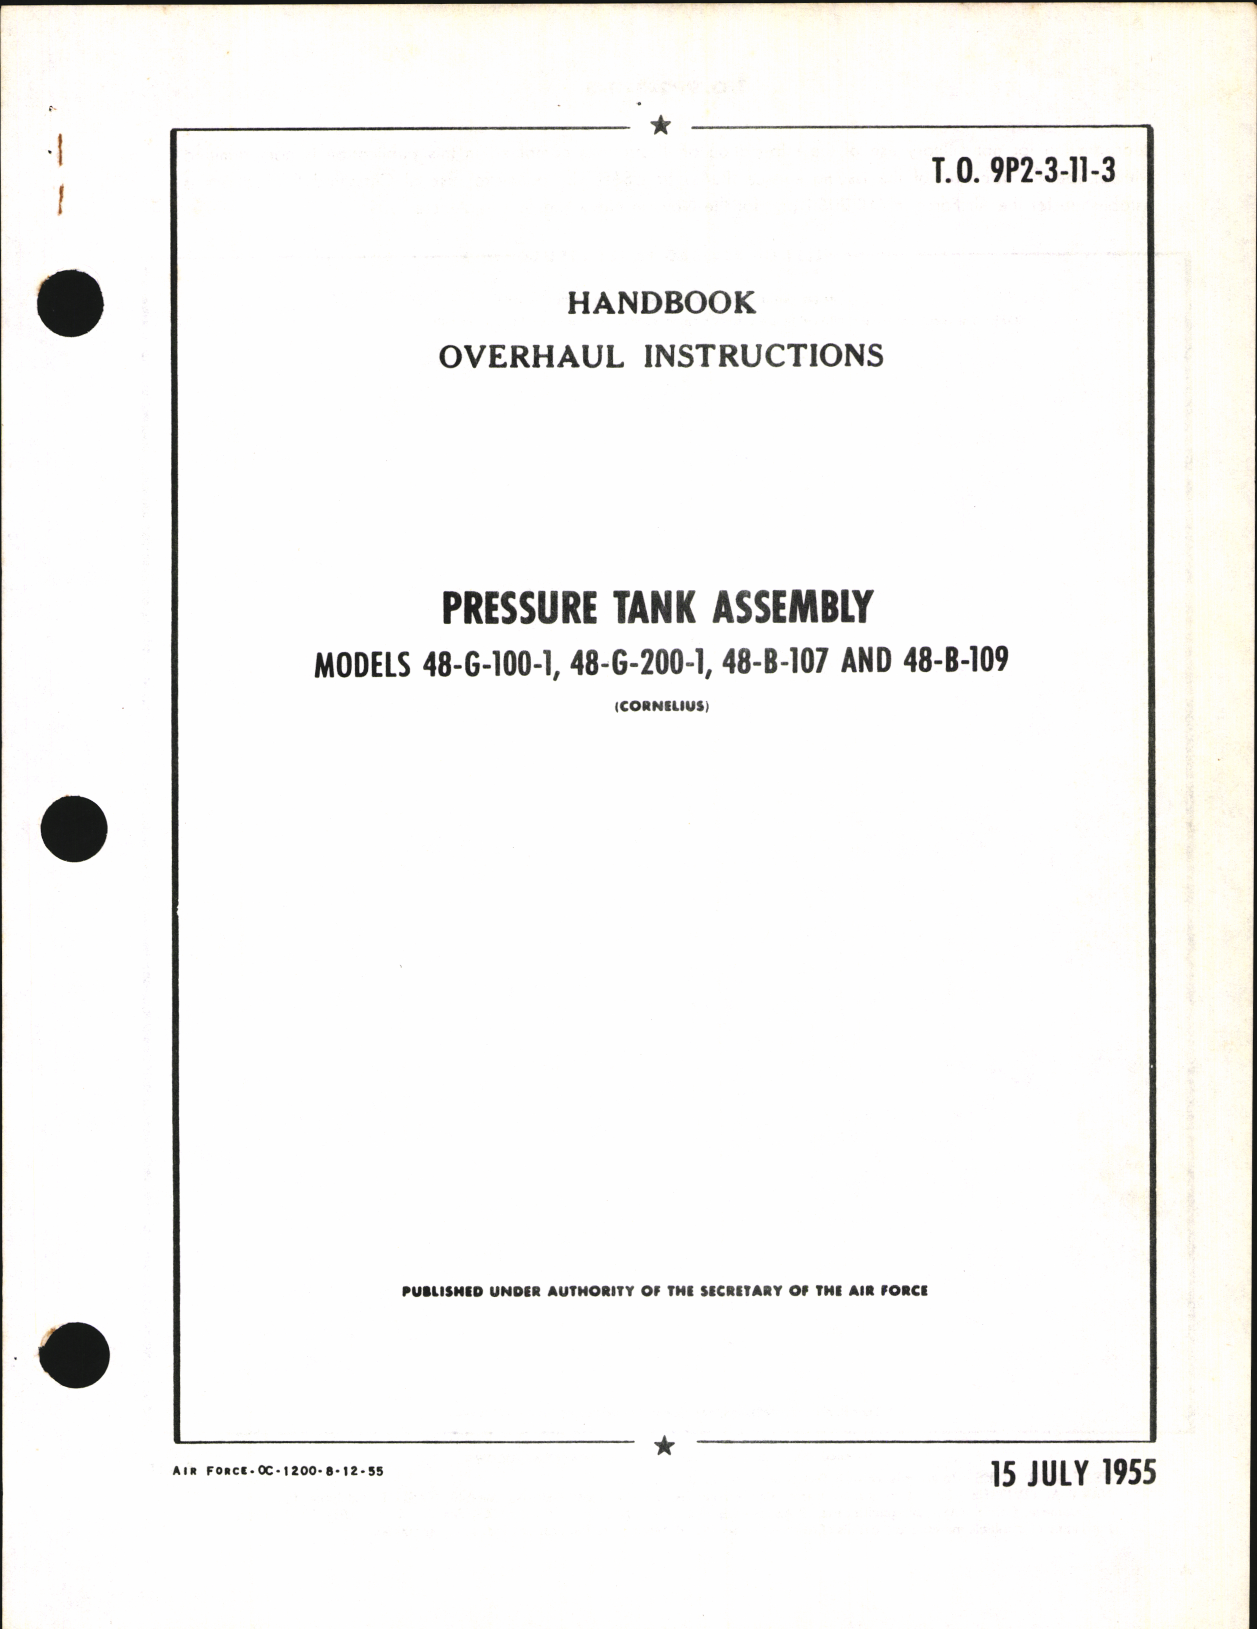 Sample page 1 from AirCorps Library document: Handbook of Overhaul Instructions for Pressure Tank Assembly Models 48-G-100-1, 48-G-200-1, 48-B-107, 48-B-109